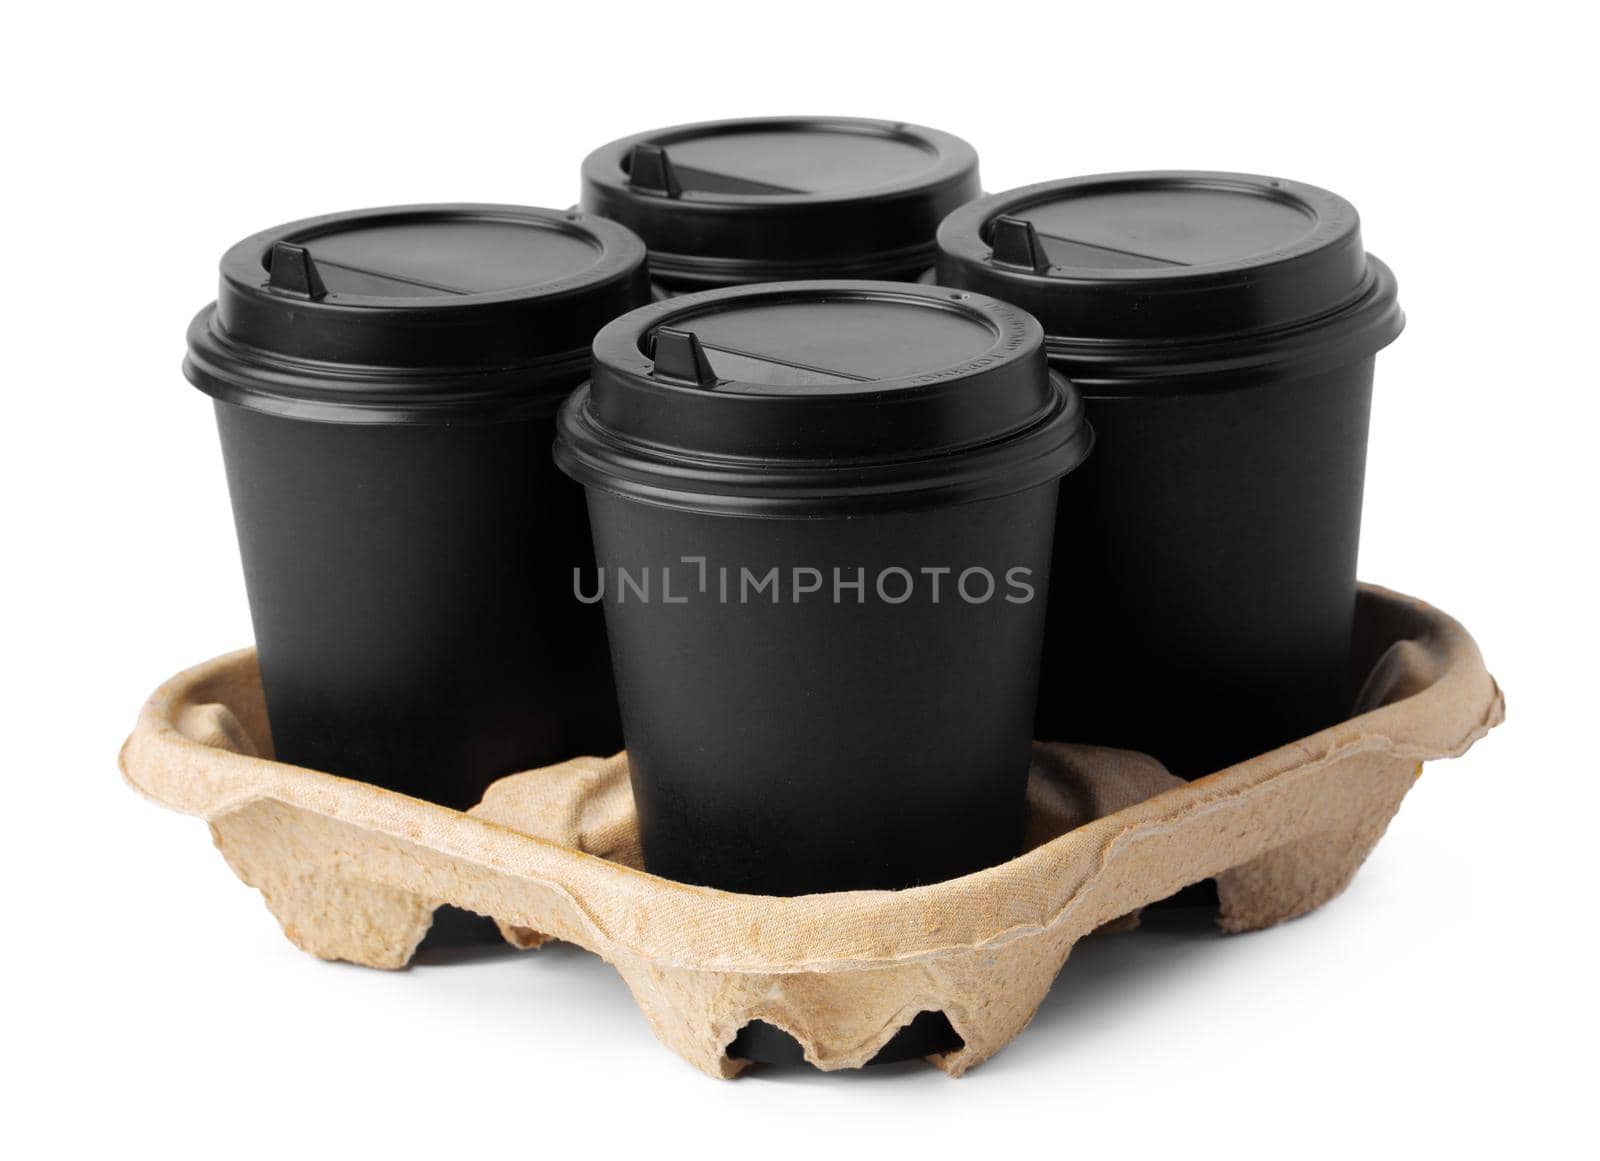 Four takeaway coffee cups in a tray isolated on white background